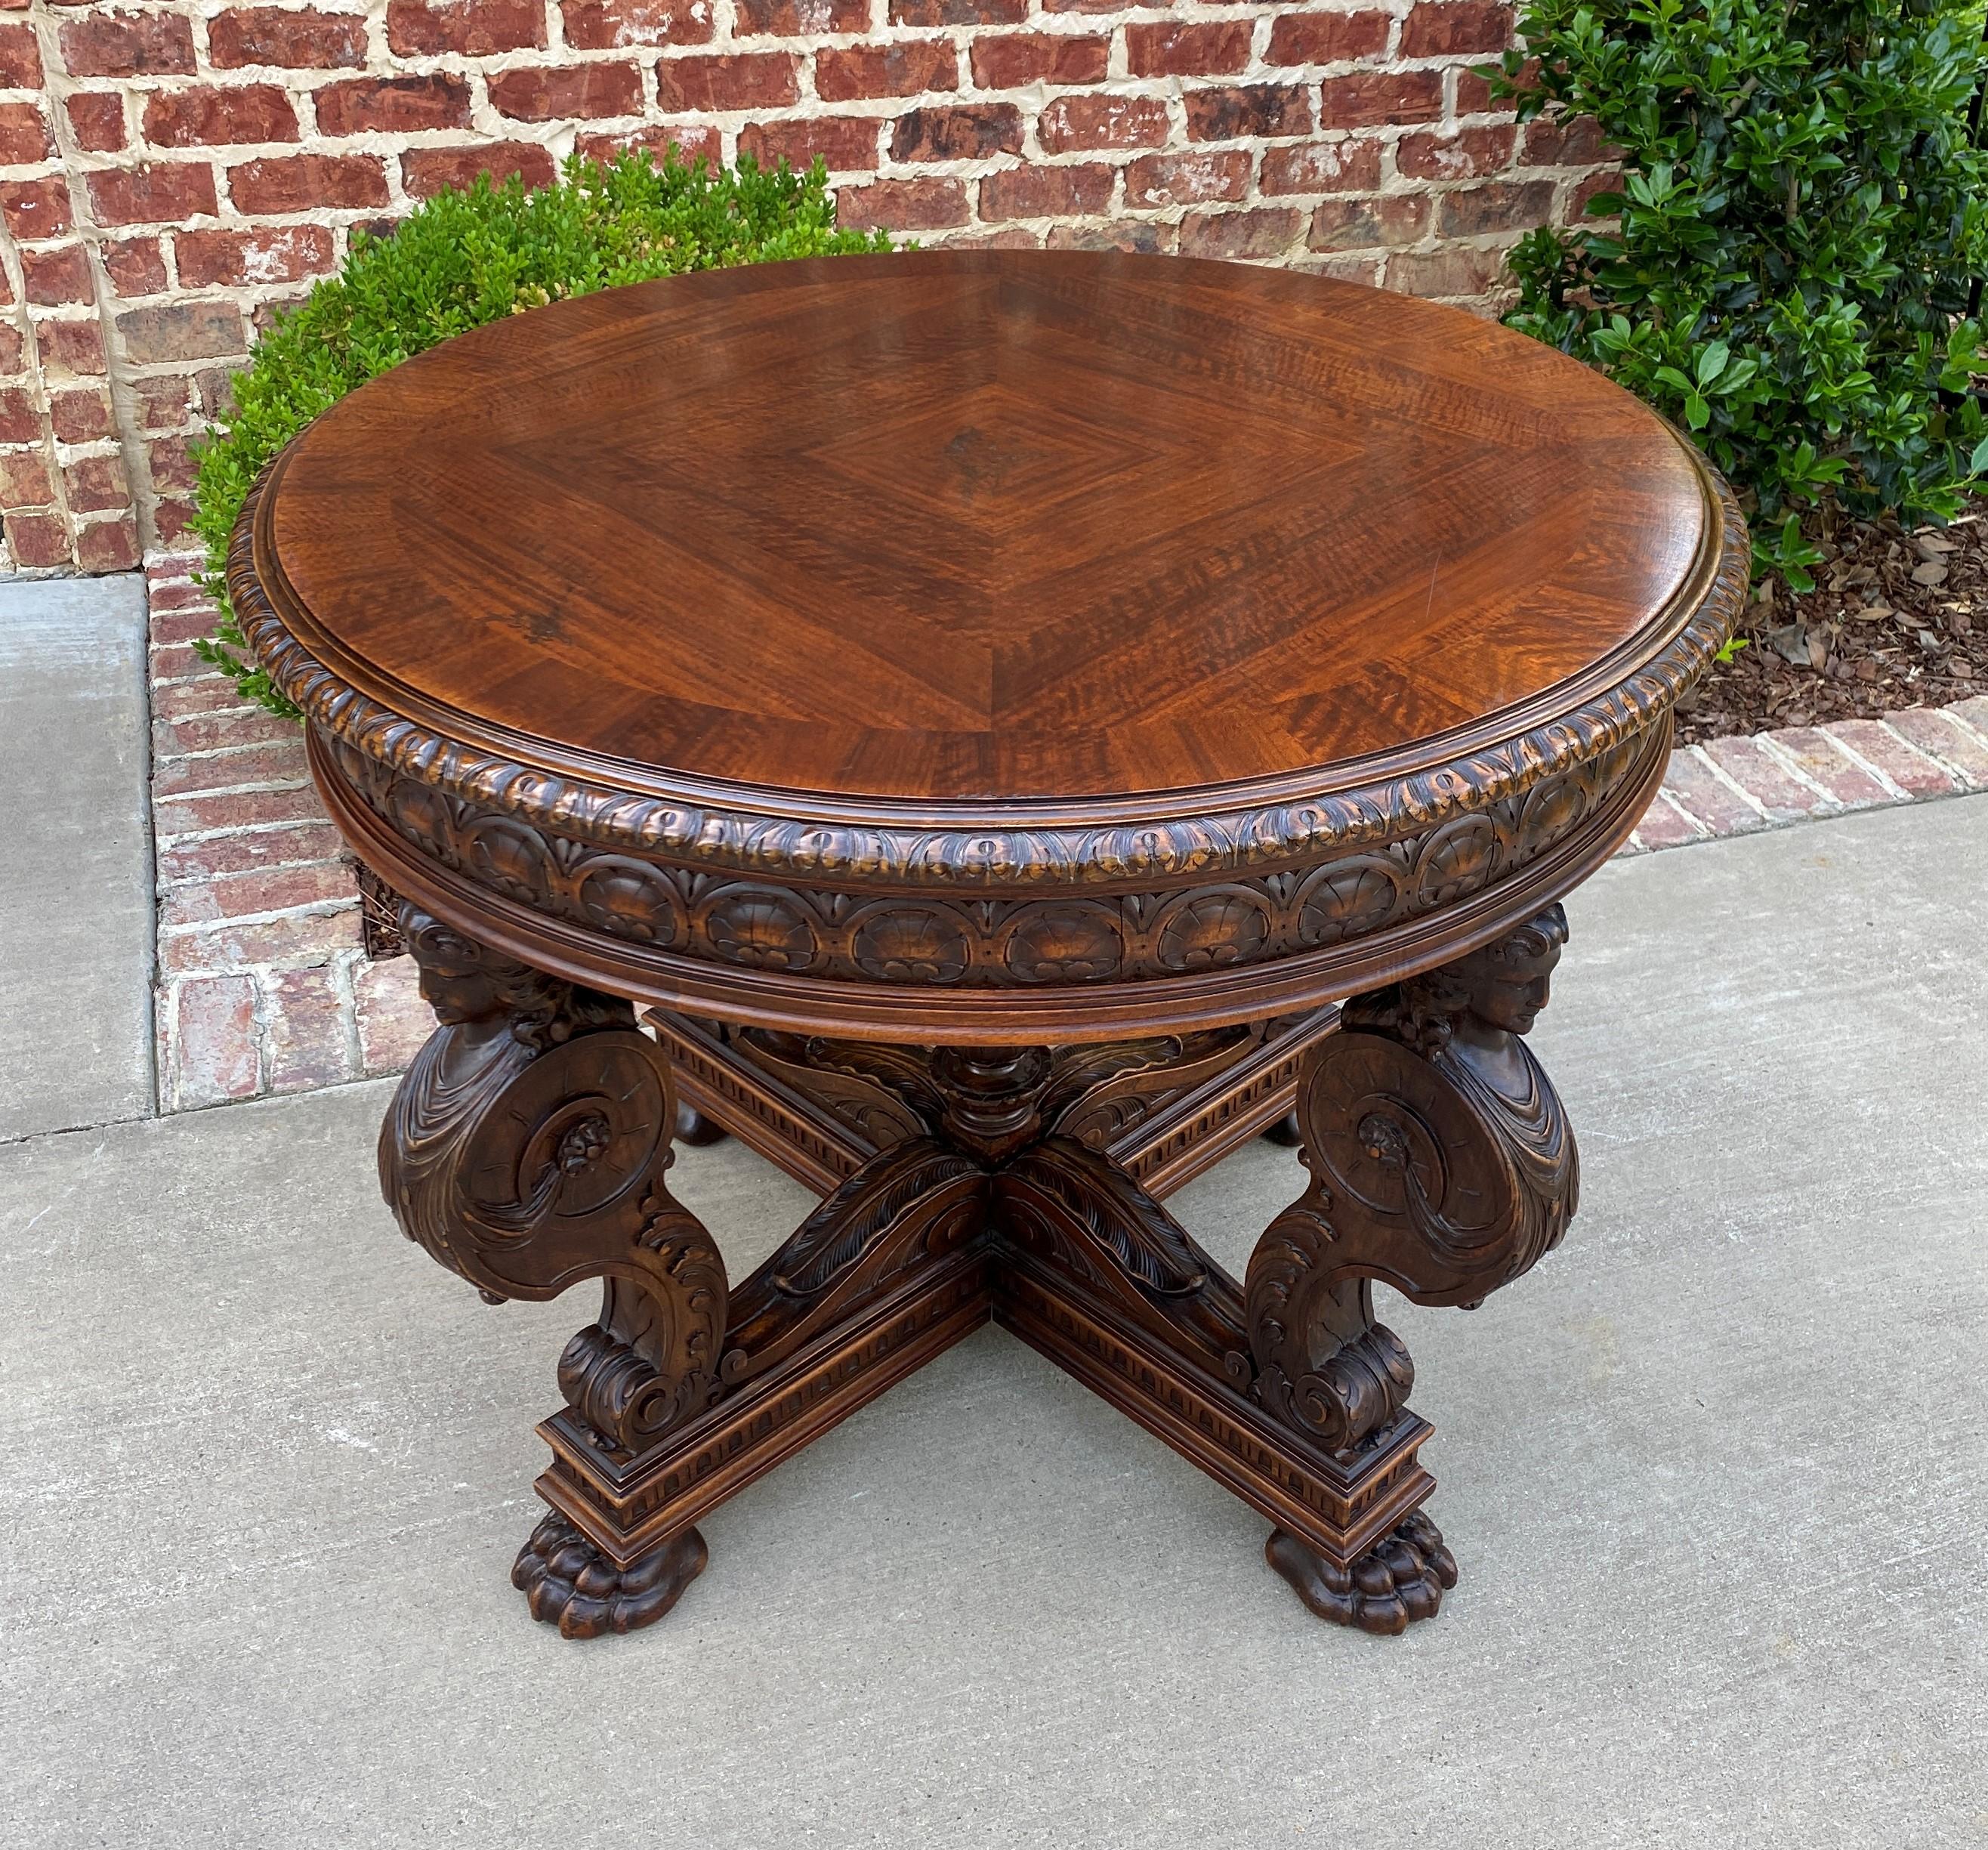 Superb highly carved late 19th century antique walnut round entry, hall, sofa, center, parlor or end table ~~Victorian era Renaissance Revival ~~c. 1890s

These versatile tables were very popular in late Victorian era French country homes and